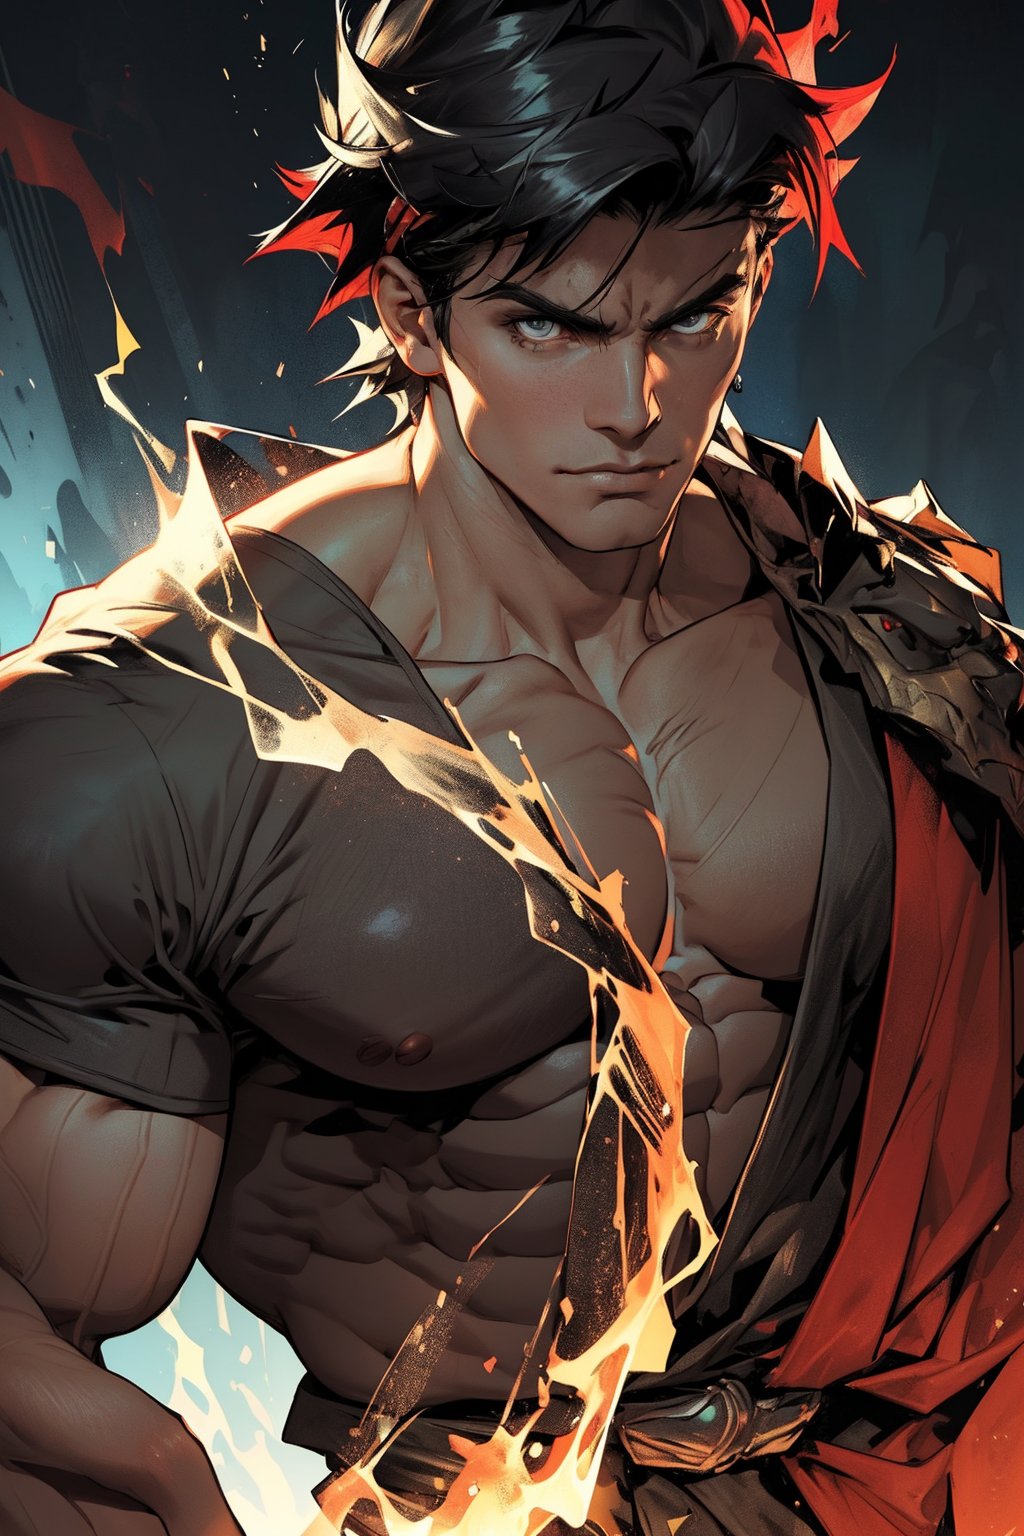 A close-up shot of Zagreus' chiseled face, his piercing gaze fixed on the camera as he proudly displays his massive, well-defined muscles. His broad shoulders and powerful physique are set against a dark, ominous background, lit by a single, intense spotlight that accentuates every contour of his imposing figure.